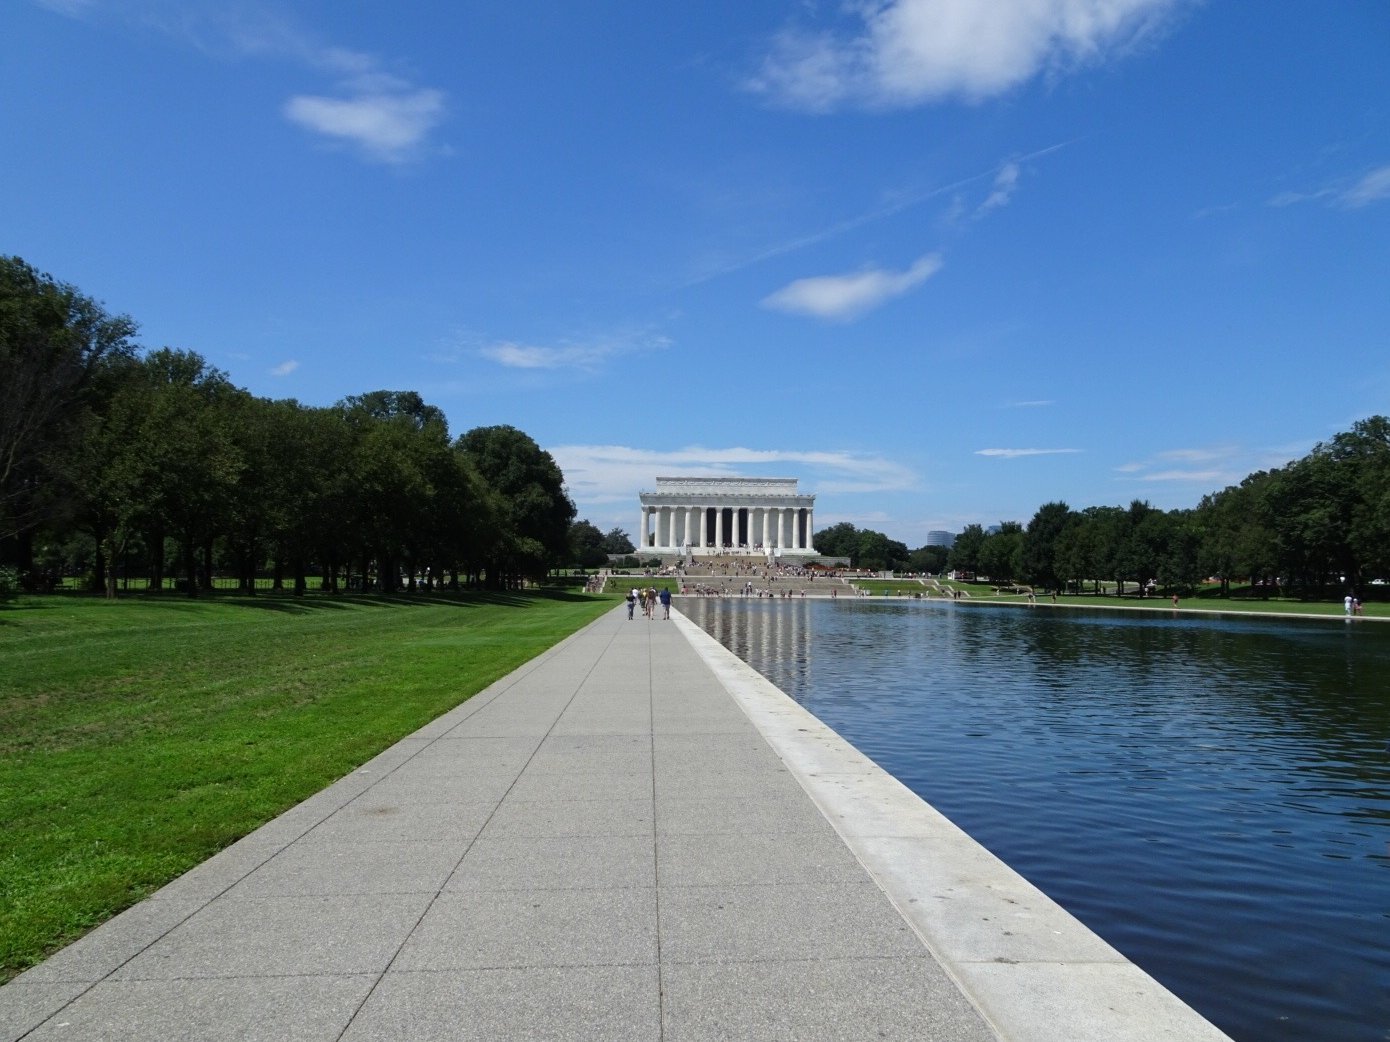 View across the National Mall to the Lincoln Memorial